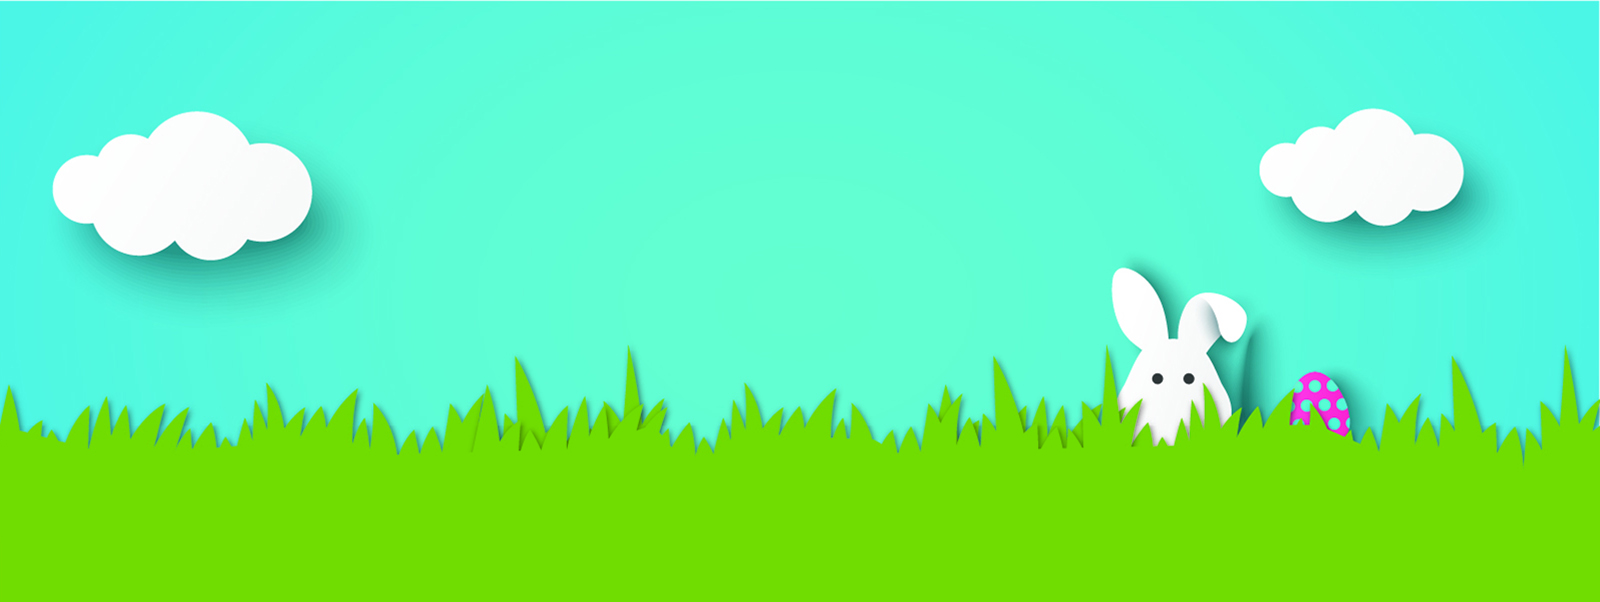 Graphic of green grass and blue sky background, with a hidden white bunny and a painted egg